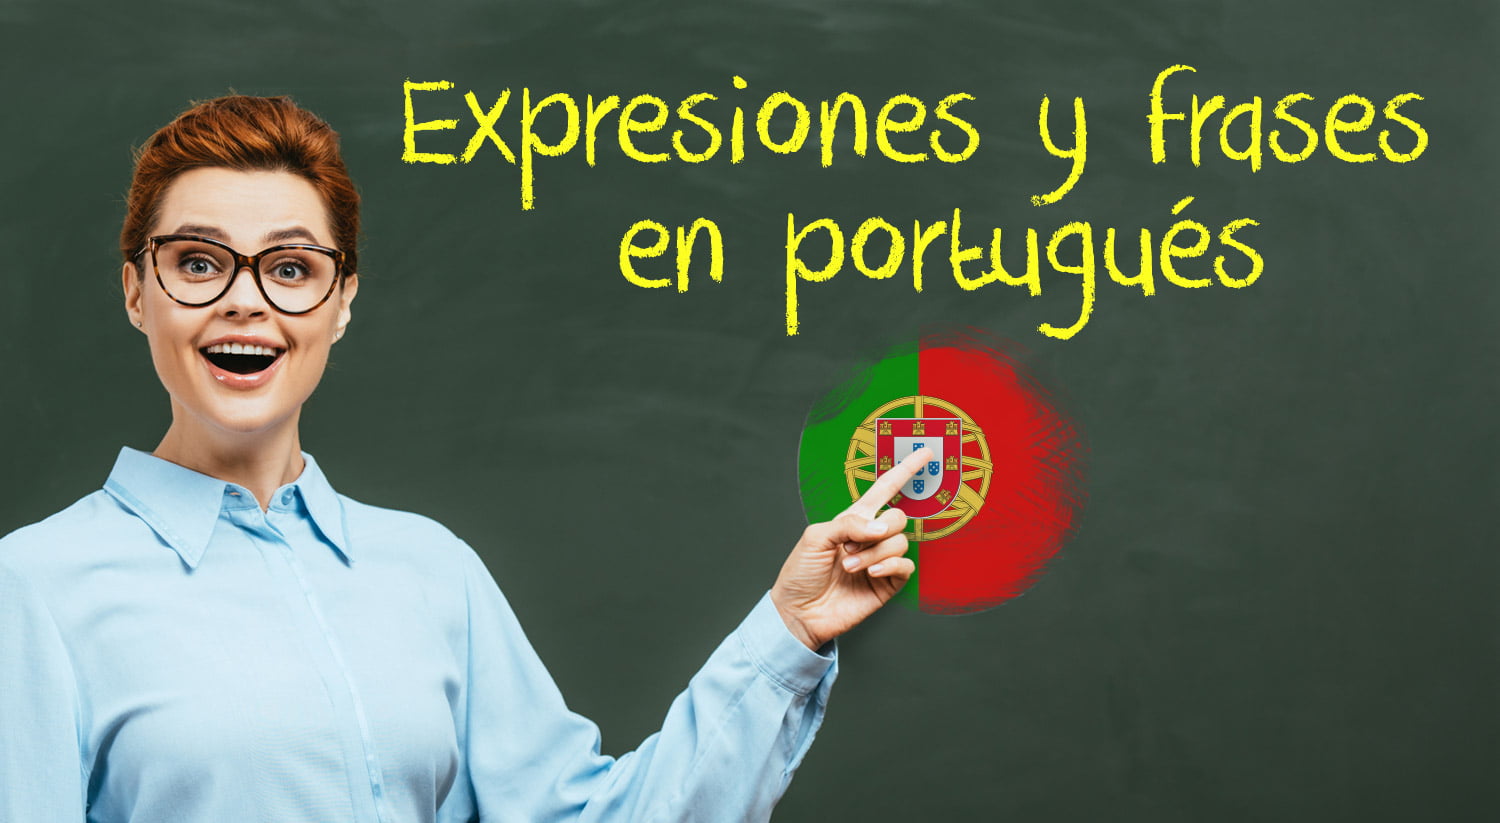 Expresiones frases portugues